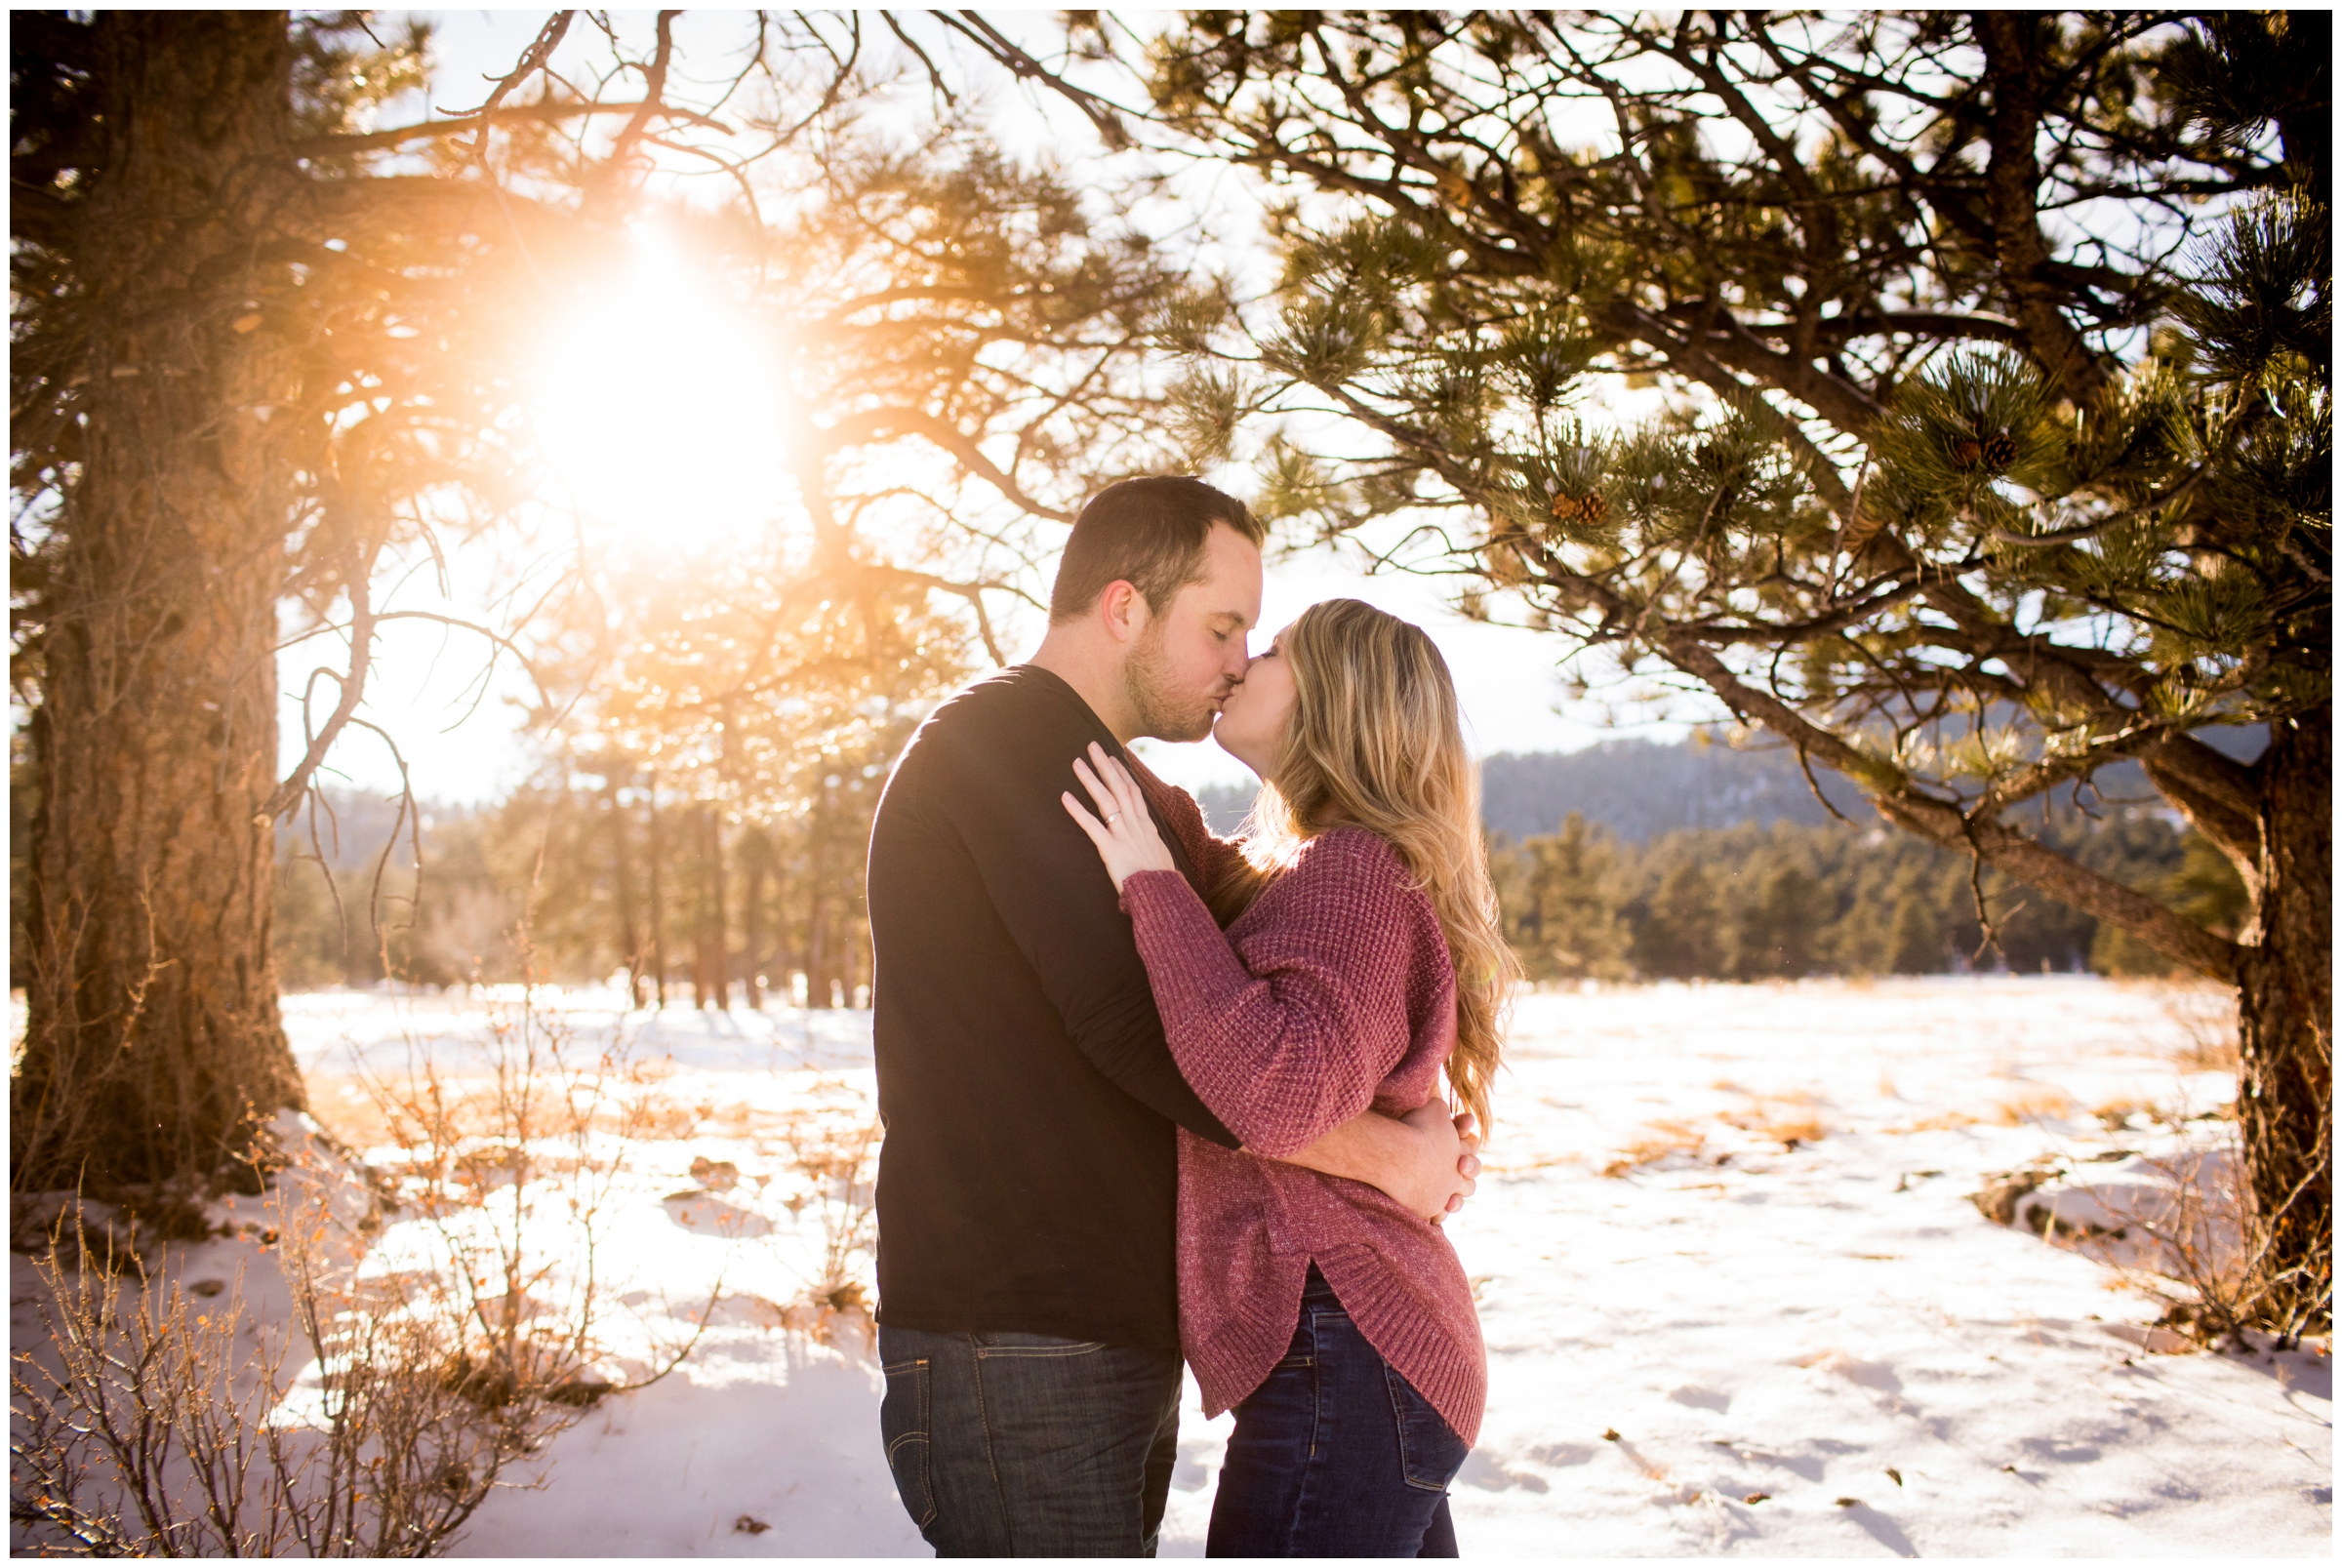 sunny and snowy winter engagement pictures in Evergreen Colorado 